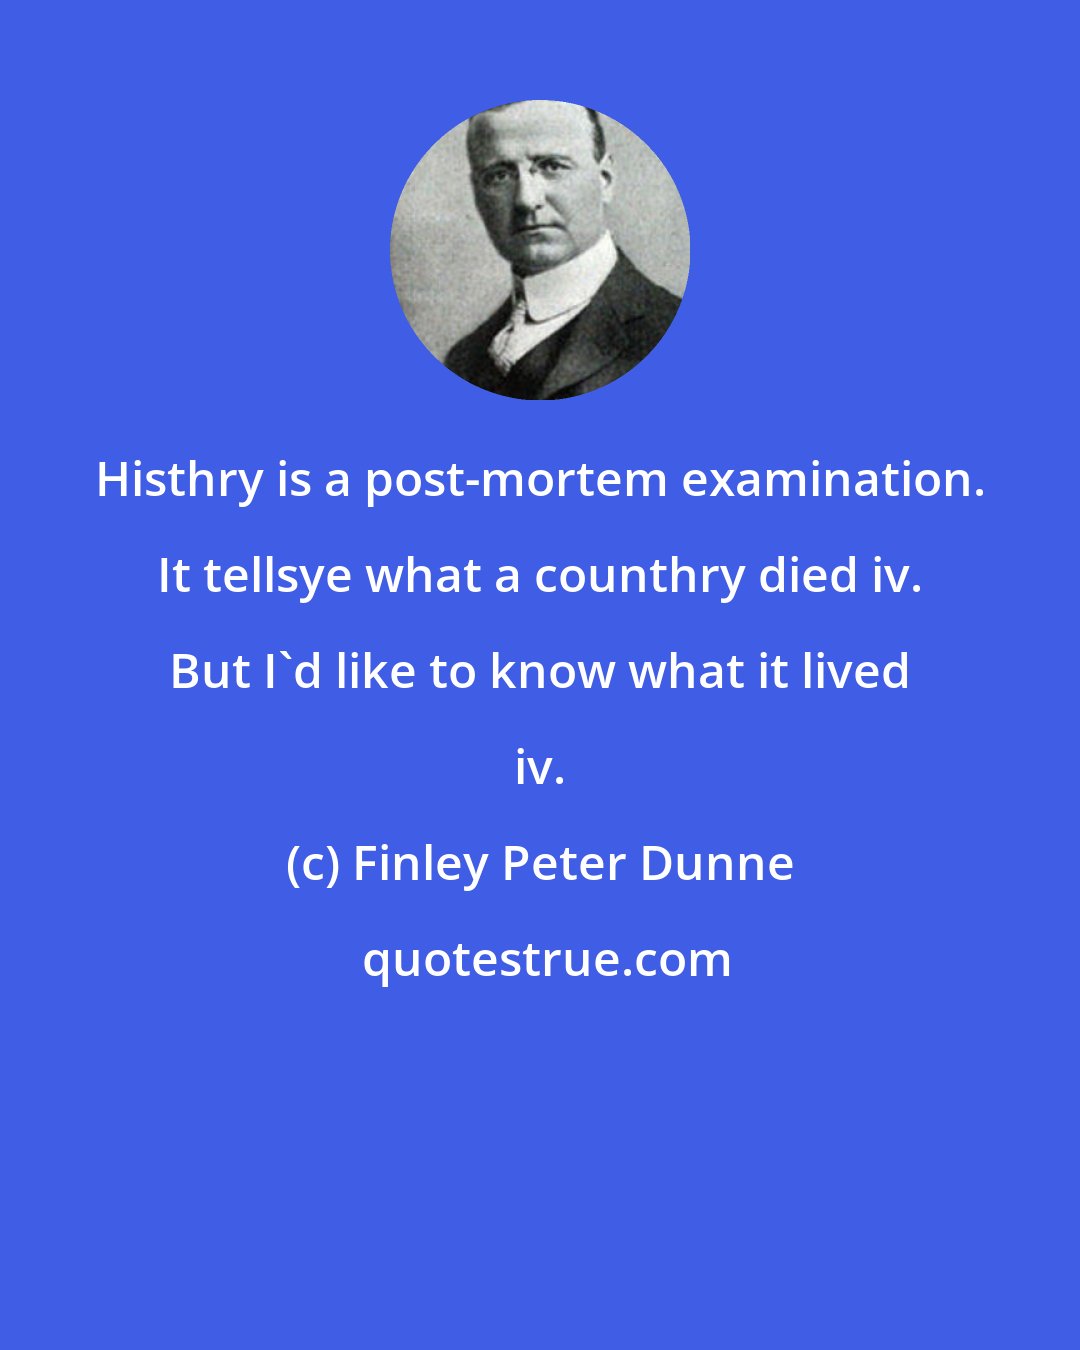 Finley Peter Dunne: Histhry is a post-mortem examination. It tellsye what a counthry died iv. But I'd like to know what it lived iv.